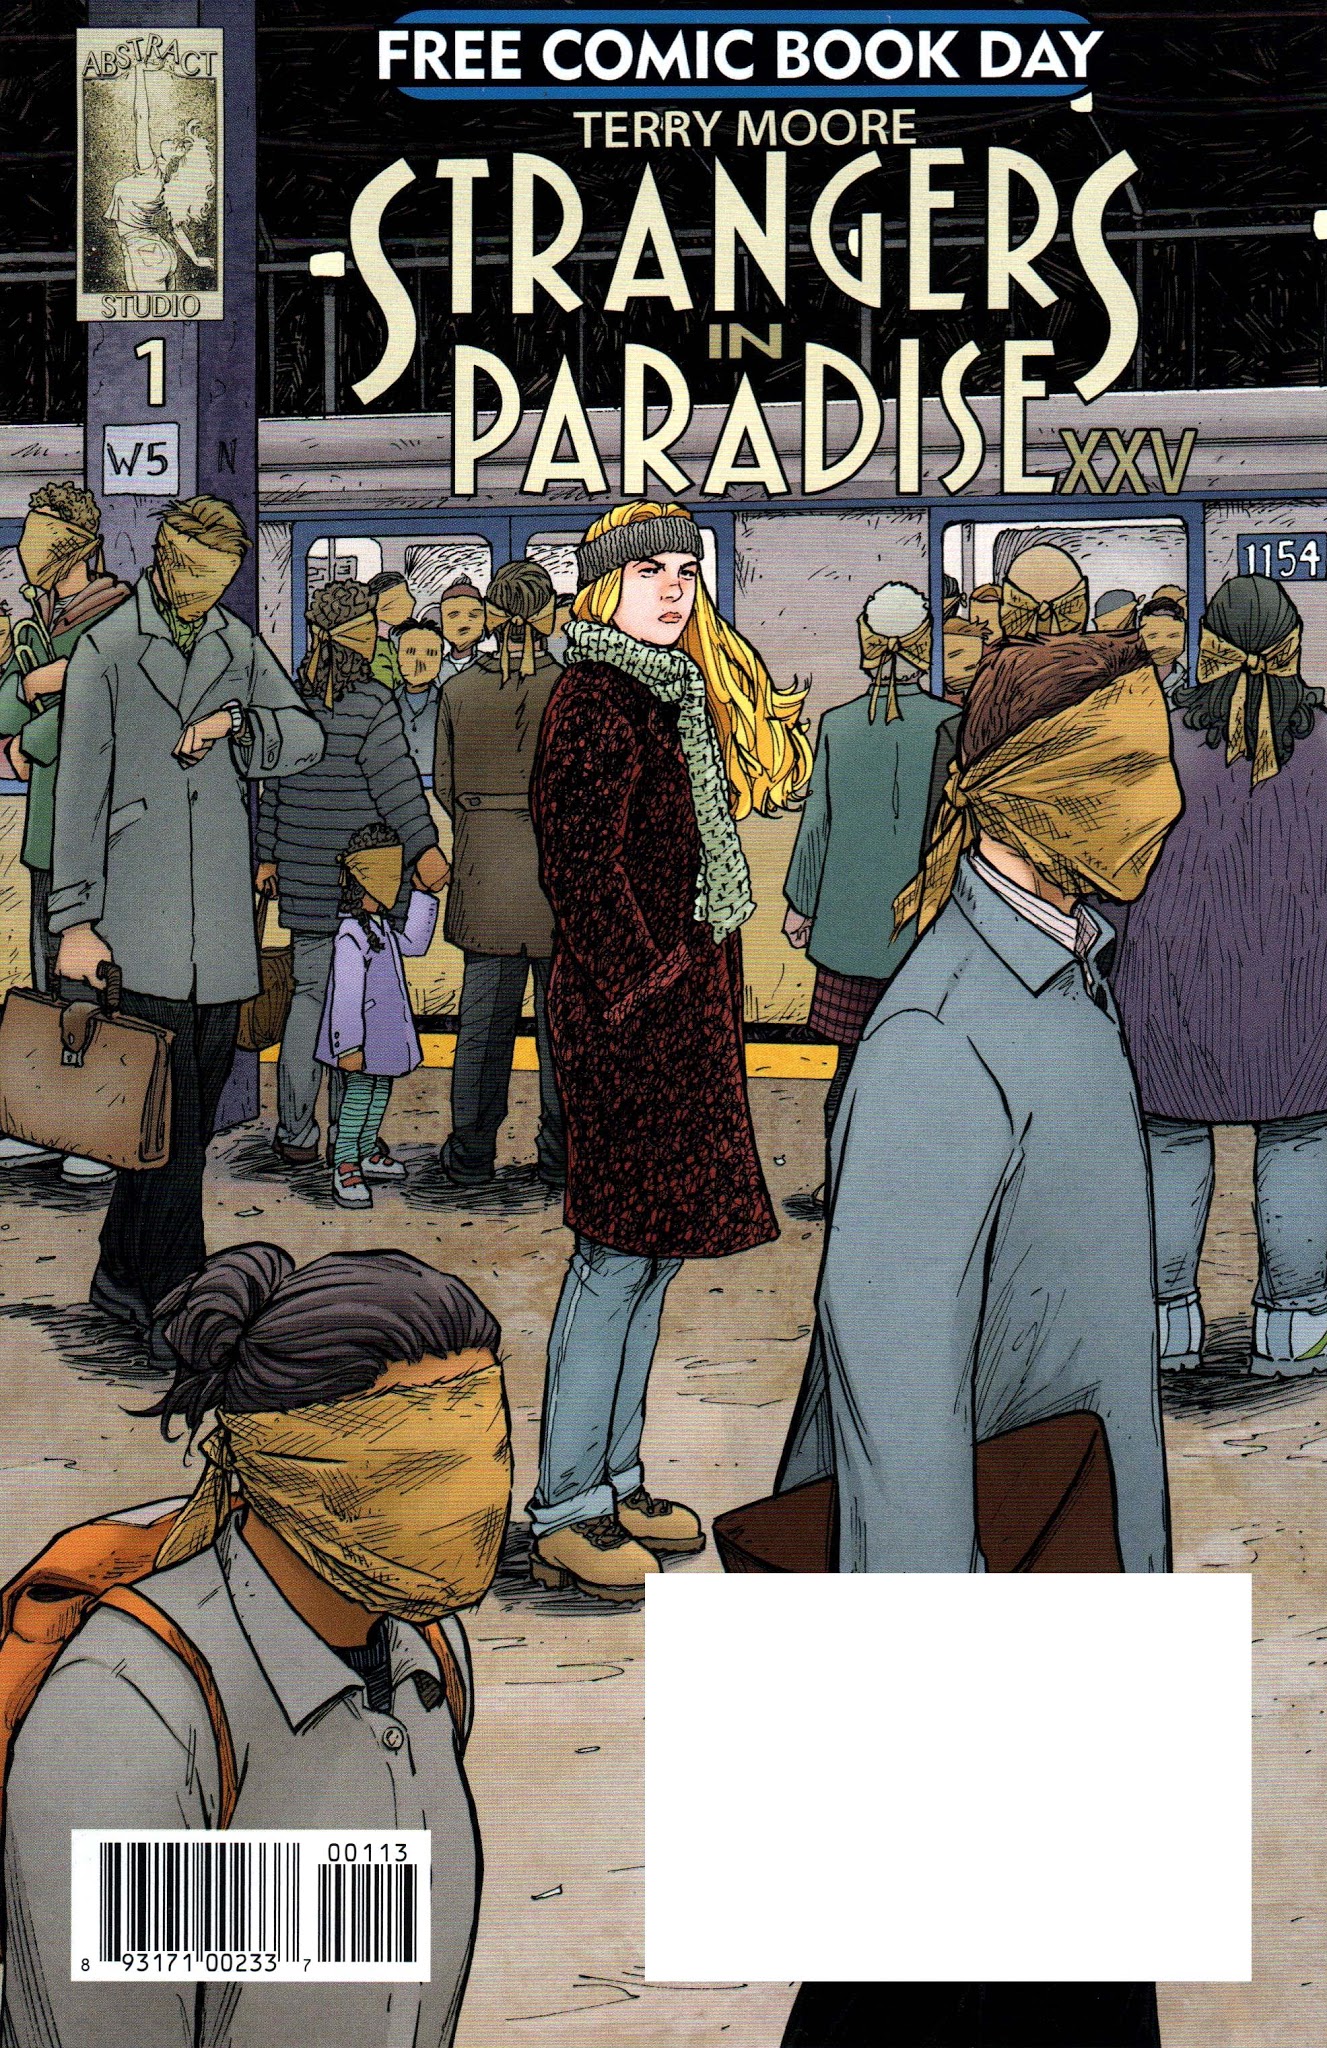 Read online Free Comic Book Day 2018 comic -  Issue # Strangers in Paradise - 1